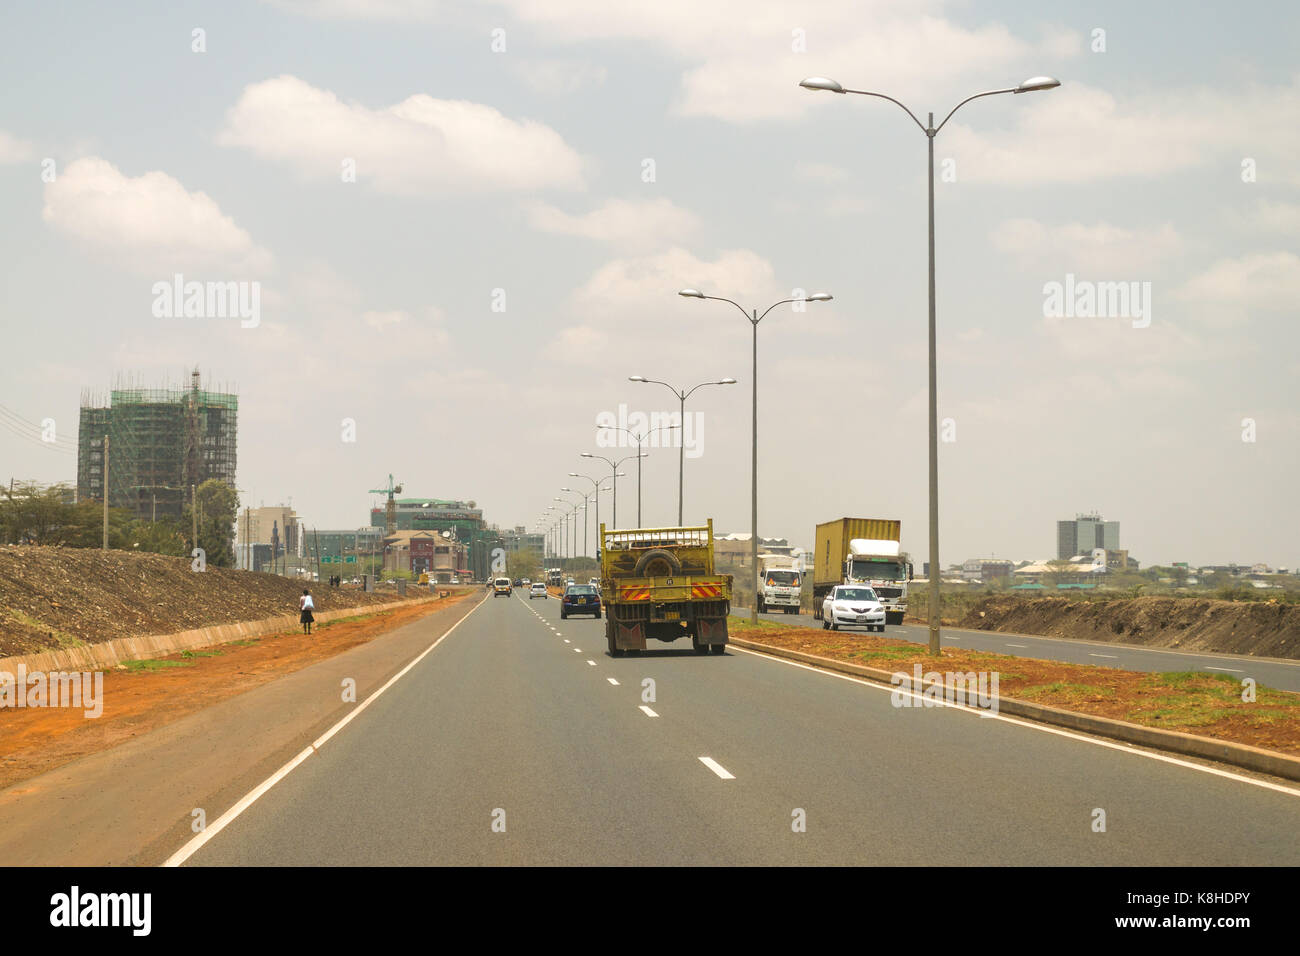 Southern bypass highway with vehicles driving in both directions, Kenya Stock Photo